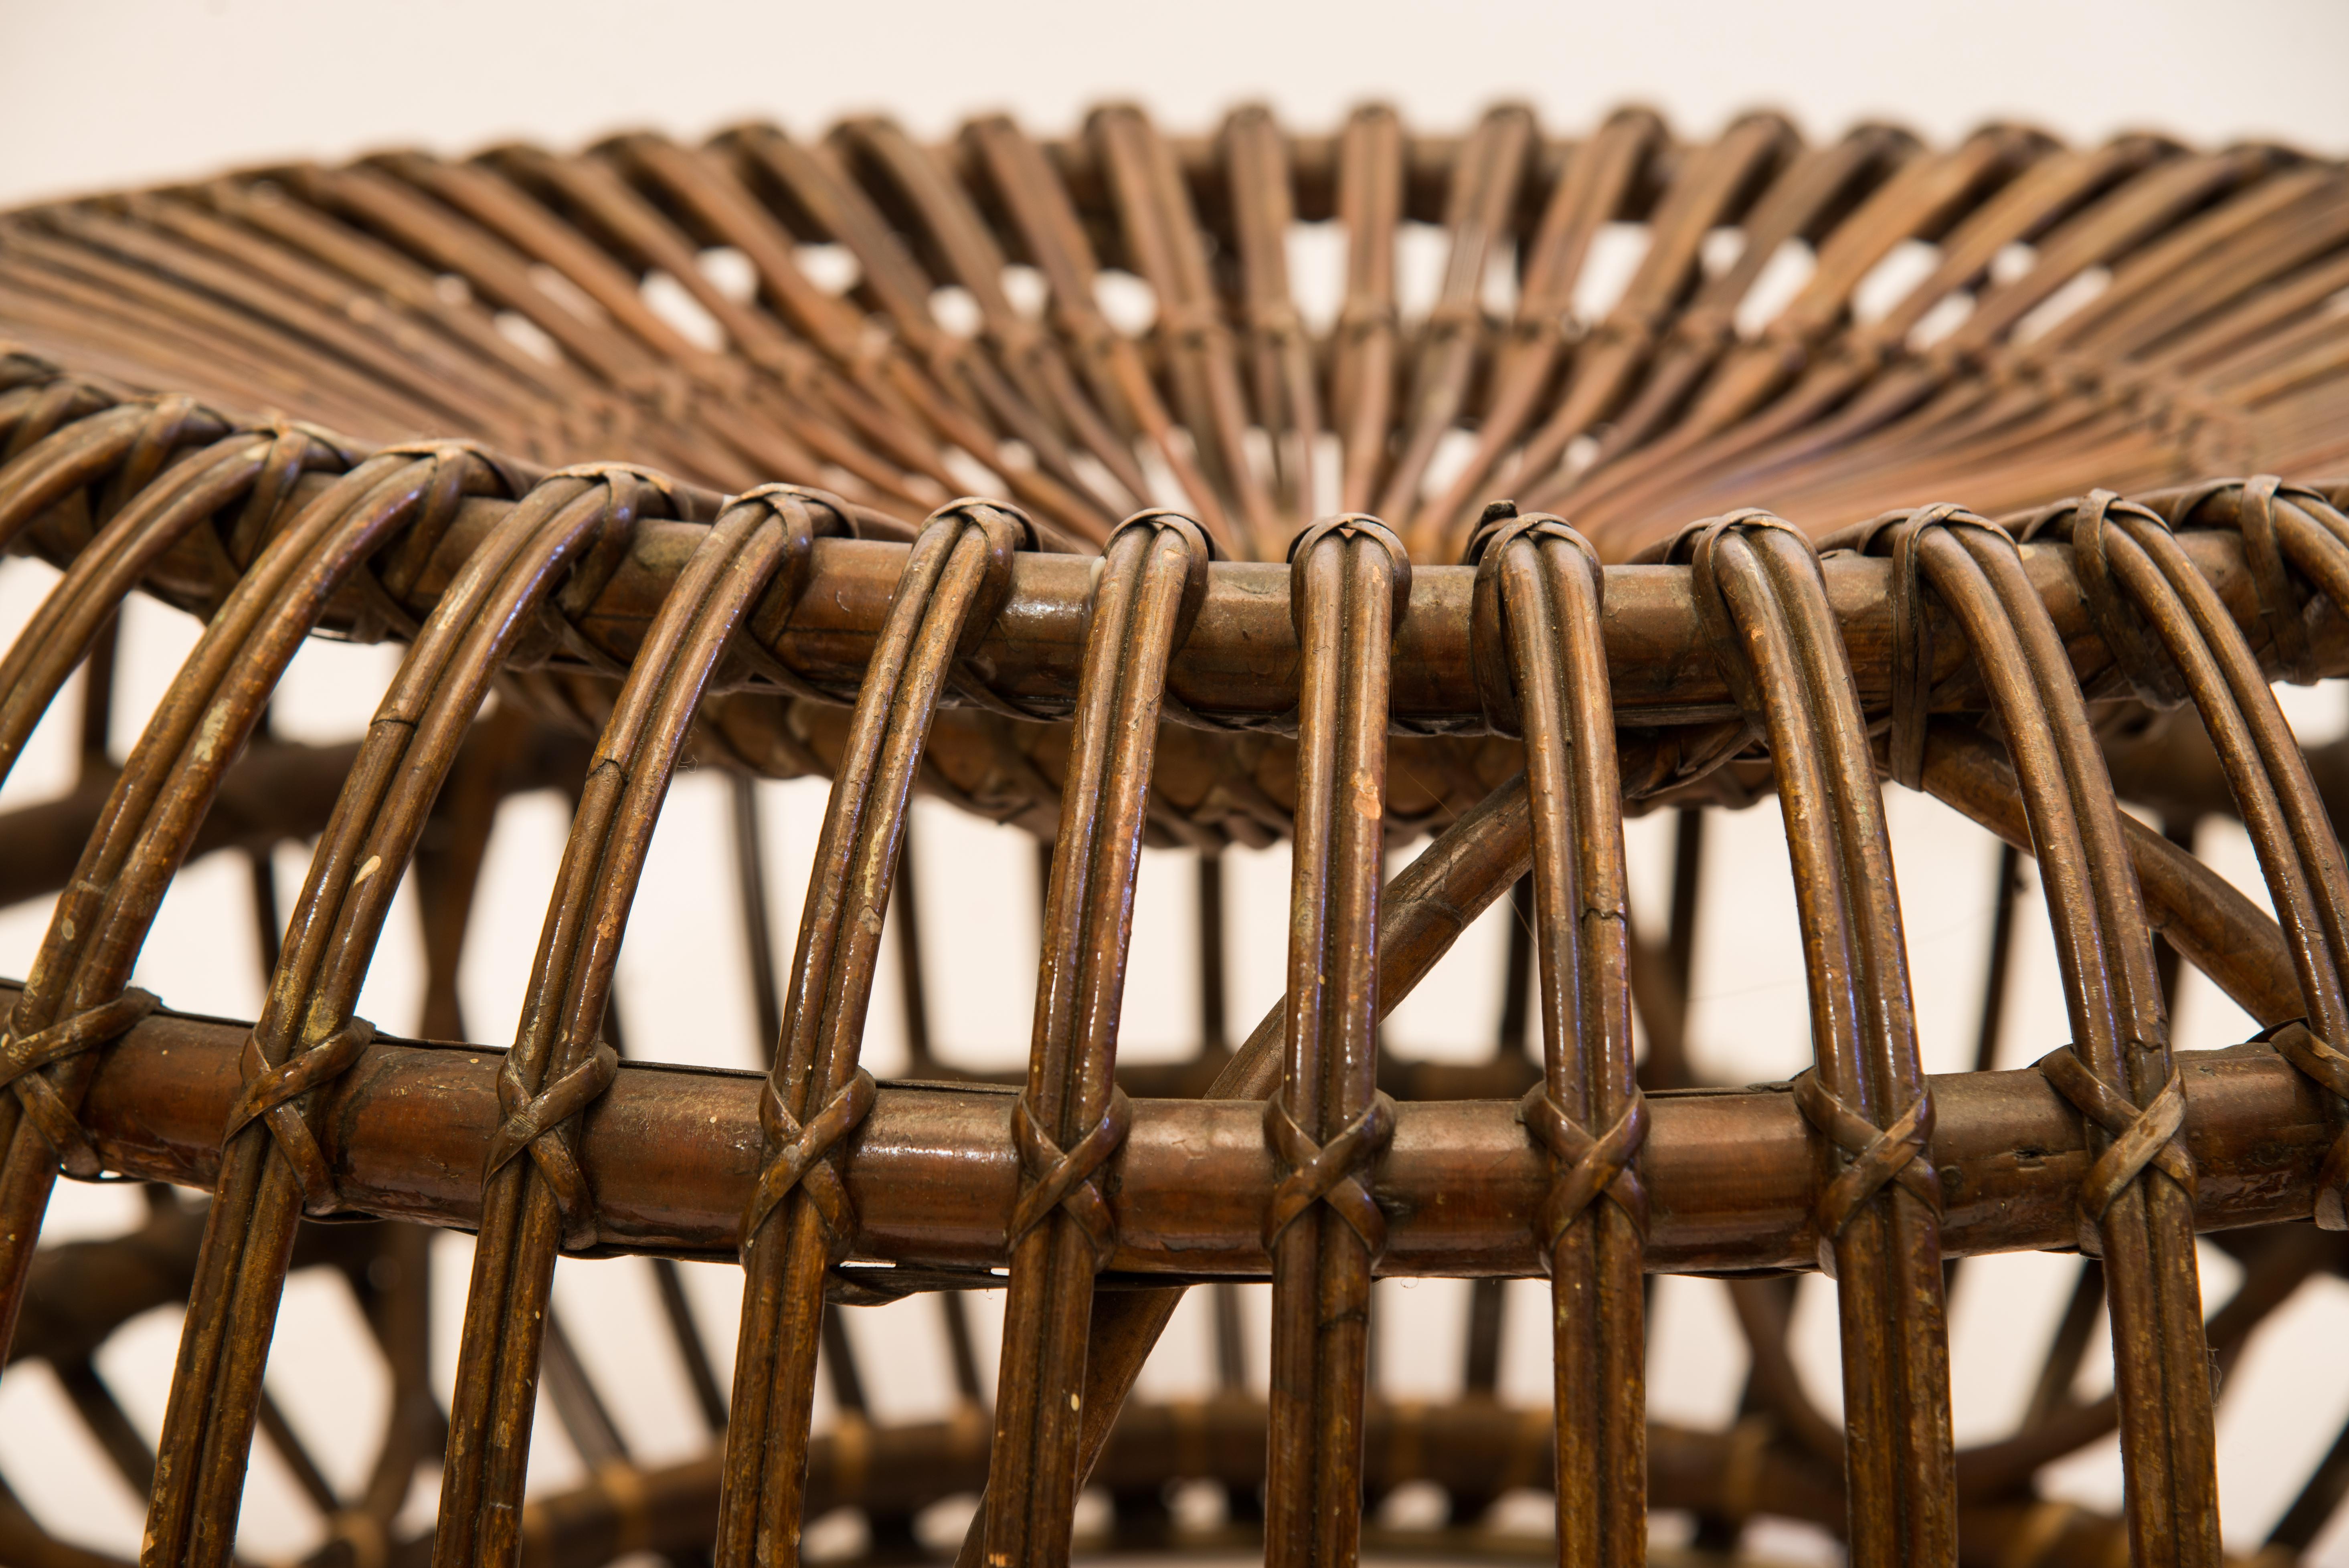 Mid-century wicker rattan ottoman
Italy, ’50 - ’60
Measures: Diameter : 76 cm; Height : 38 cm

Iconic Mid-century ottoman, in the style of Italian designer Franco Albini. 
Manufactured in Italy in the 1950's. Due to its large proportions, this